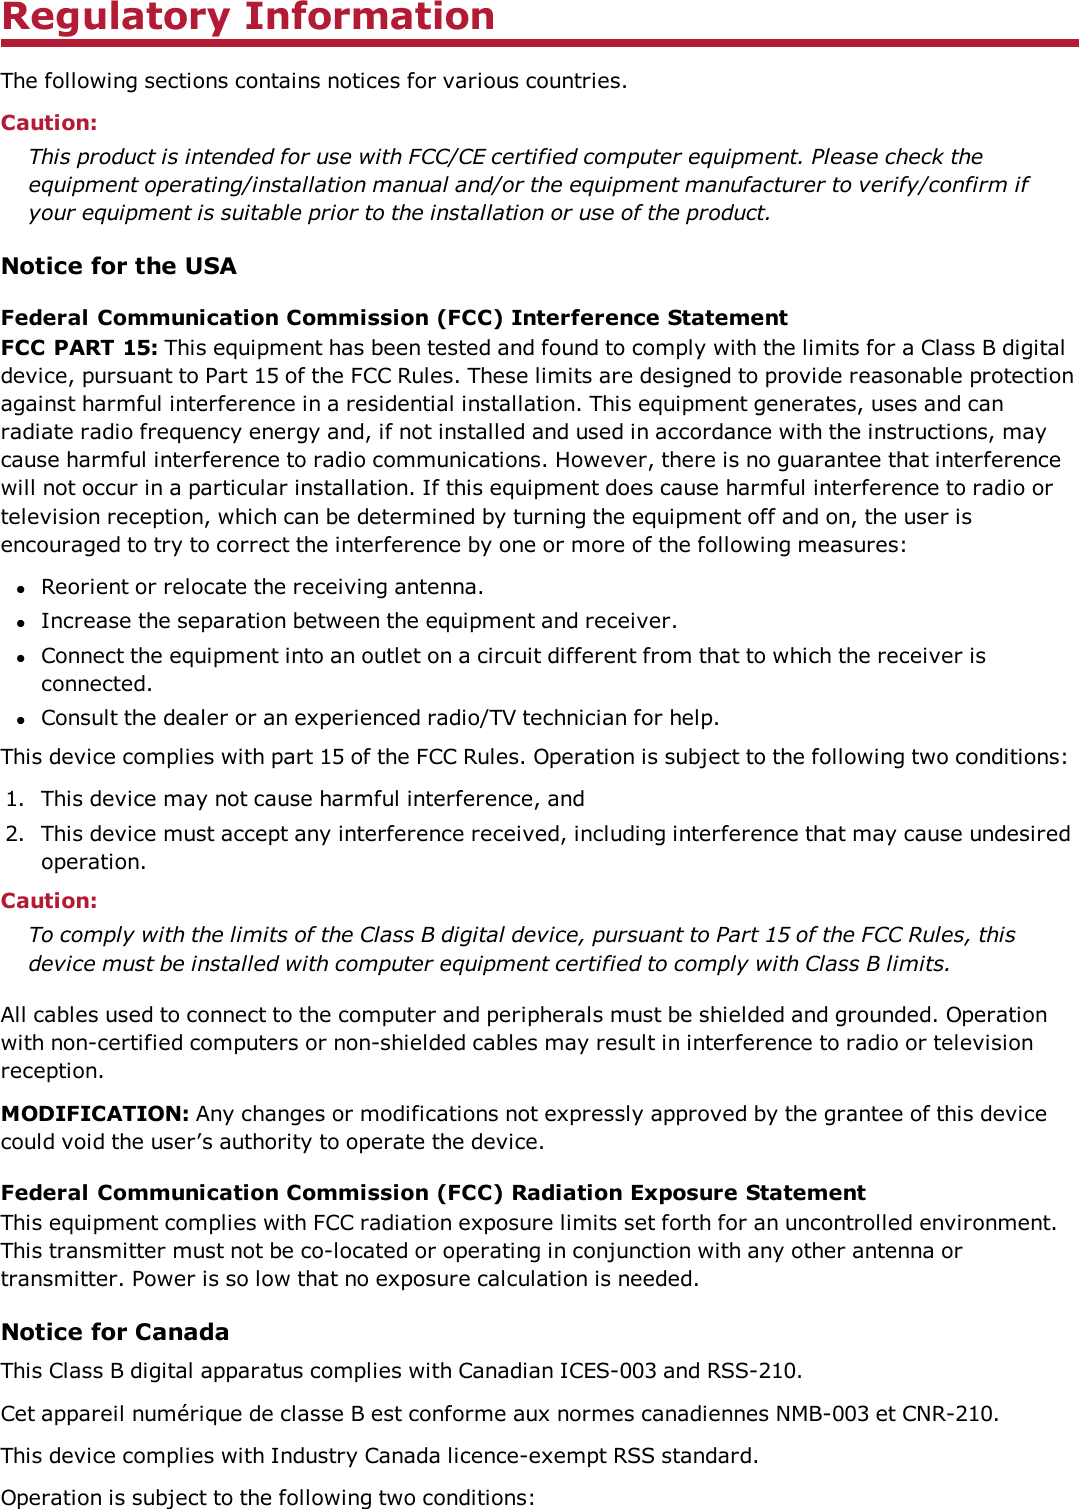 Regulatory InformationThe following sections contains notices for various countries.Caution:This product is intended for use with FCC/CE certified computer equipment. Please check theequipment operating/installation manual and/or the equipment manufacturer to verify/confirm ifyour equipment is suitable prior to the installation or use of the product.Notice for the USAFederal Communication Commission (FCC) Interference StatementFCC PART 15: This equipment has been tested and found to comply with the limits for a Class B digitaldevice, pursuant to Part 15 of the FCC Rules. These limits are designed to provide reasonable protectionagainst harmful interference in a residential installation. This equipment generates, uses and canradiate radio frequency energy and, if not installed and used in accordance with the instructions, maycause harmful interference to radio communications. However, there is no guarantee that interferencewill not occur in a particular installation. If this equipment does cause harmful interference to radio ortelevision reception, which can be determined by turning the equipment off and on, the user isencouraged to try to correct the interference by one or more of the following measures:lReorient or relocate the receiving antenna.lIncrease the separation between the equipment and receiver.lConnect the equipment into an outlet on a circuit different from that to which the receiver isconnected.lConsult the dealer or an experienced radio/TV technician for help.This device complies with part 15 of the FCC Rules. Operation is subject to the following two conditions:1. This device may not cause harmful interference, and2. This device must accept any interference received, including interference that may cause undesiredoperation.Caution:To comply with the limits of the Class B digital device, pursuant to Part 15 of the FCC Rules, thisdevice must be installed with computer equipment certified to comply with Class B limits.All cables used to connect to the computer and peripherals must be shielded and grounded. Operationwith non-certified computers or non-shielded cables may result in interference to radio or televisionreception.MODIFICATION: Any changes or modifications not expressly approved by the grantee of this devicecould void the user’s authority to operate the device.Federal Communication Commission (FCC) Radiation Exposure StatementThis equipment complies with FCC radiation exposure limits set forth for an uncontrolled environment.This transmitter must not be co-located or operating in conjunction with any other antenna ortransmitter. Power is so low that no exposure calculation is needed.Notice for CanadaThis Class B digital apparatus complies with Canadian ICES-003 and RSS-210.Cet appareil numérique de classe B est conforme aux normes canadiennes NMB-003 et CNR-210.This device complies with Industry Canada licence-exempt RSS standard.Operation is subject to the following two conditions: